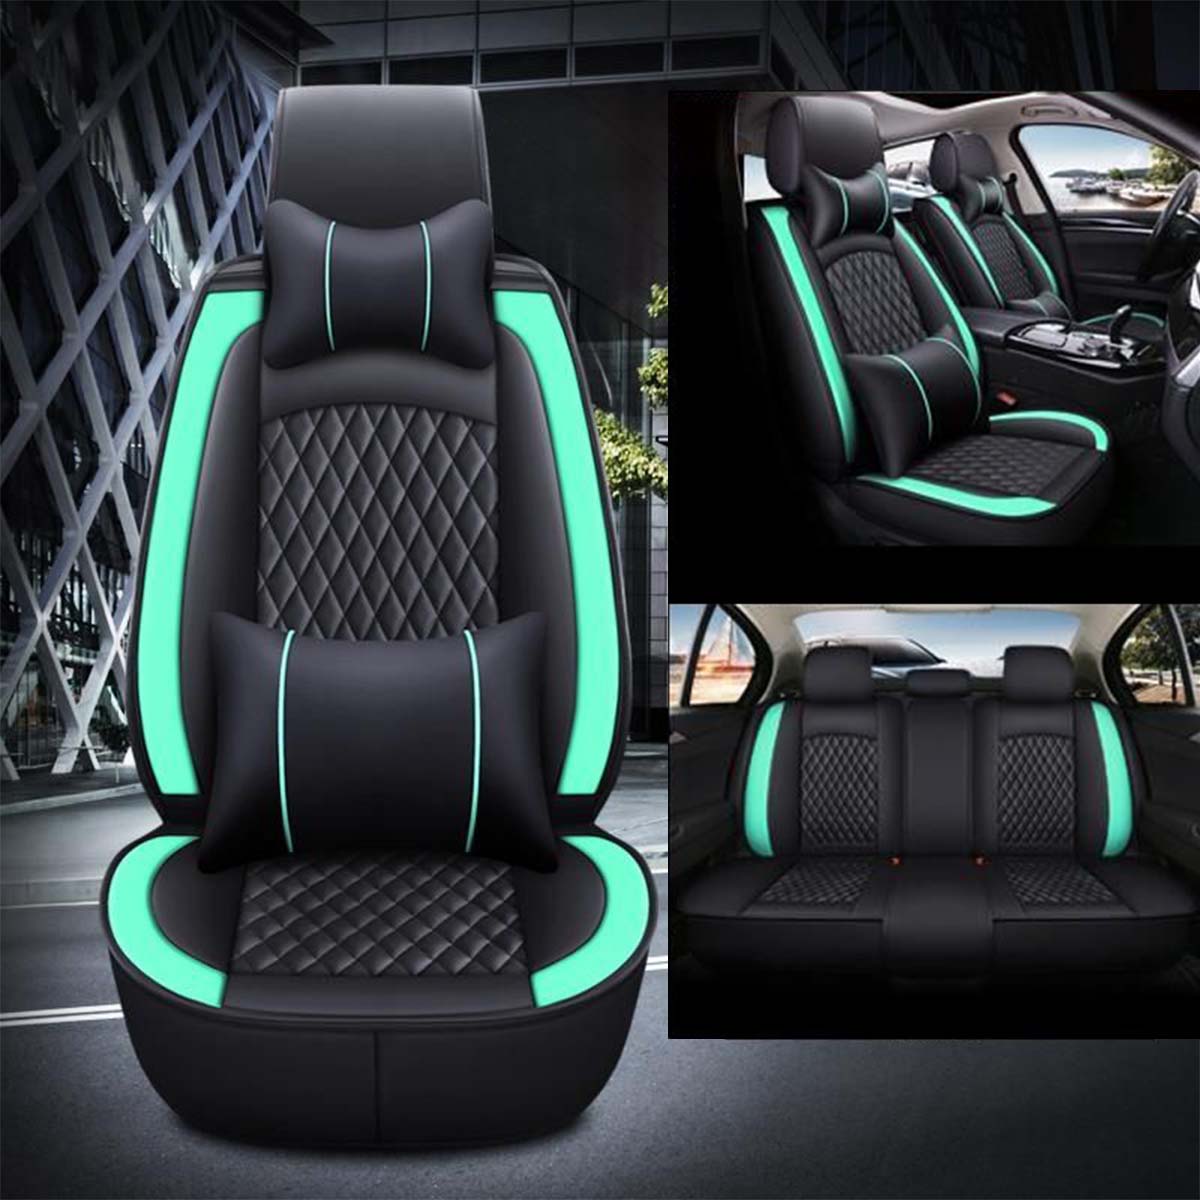 2 Car Seat Covers Full Set, Custom-Fit For Car, Waterproof Leather Front Rear Seat Automotive Protection Cushions, Car Accessories DLTS211